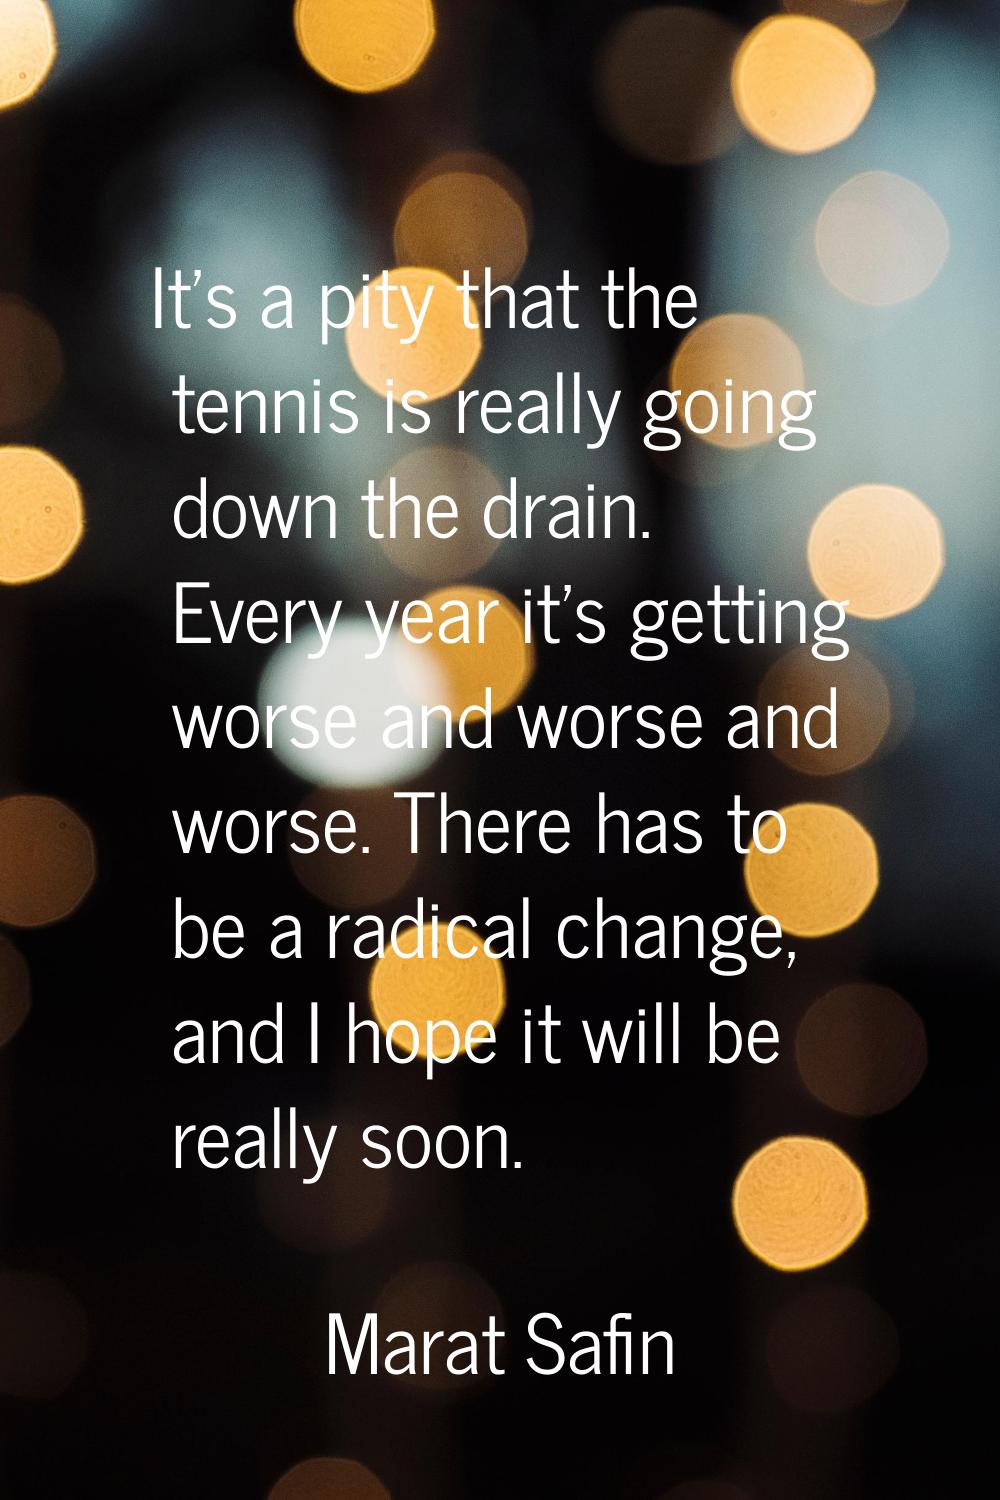 It's a pity that the tennis is really going down the drain. Every year it's getting worse and worse